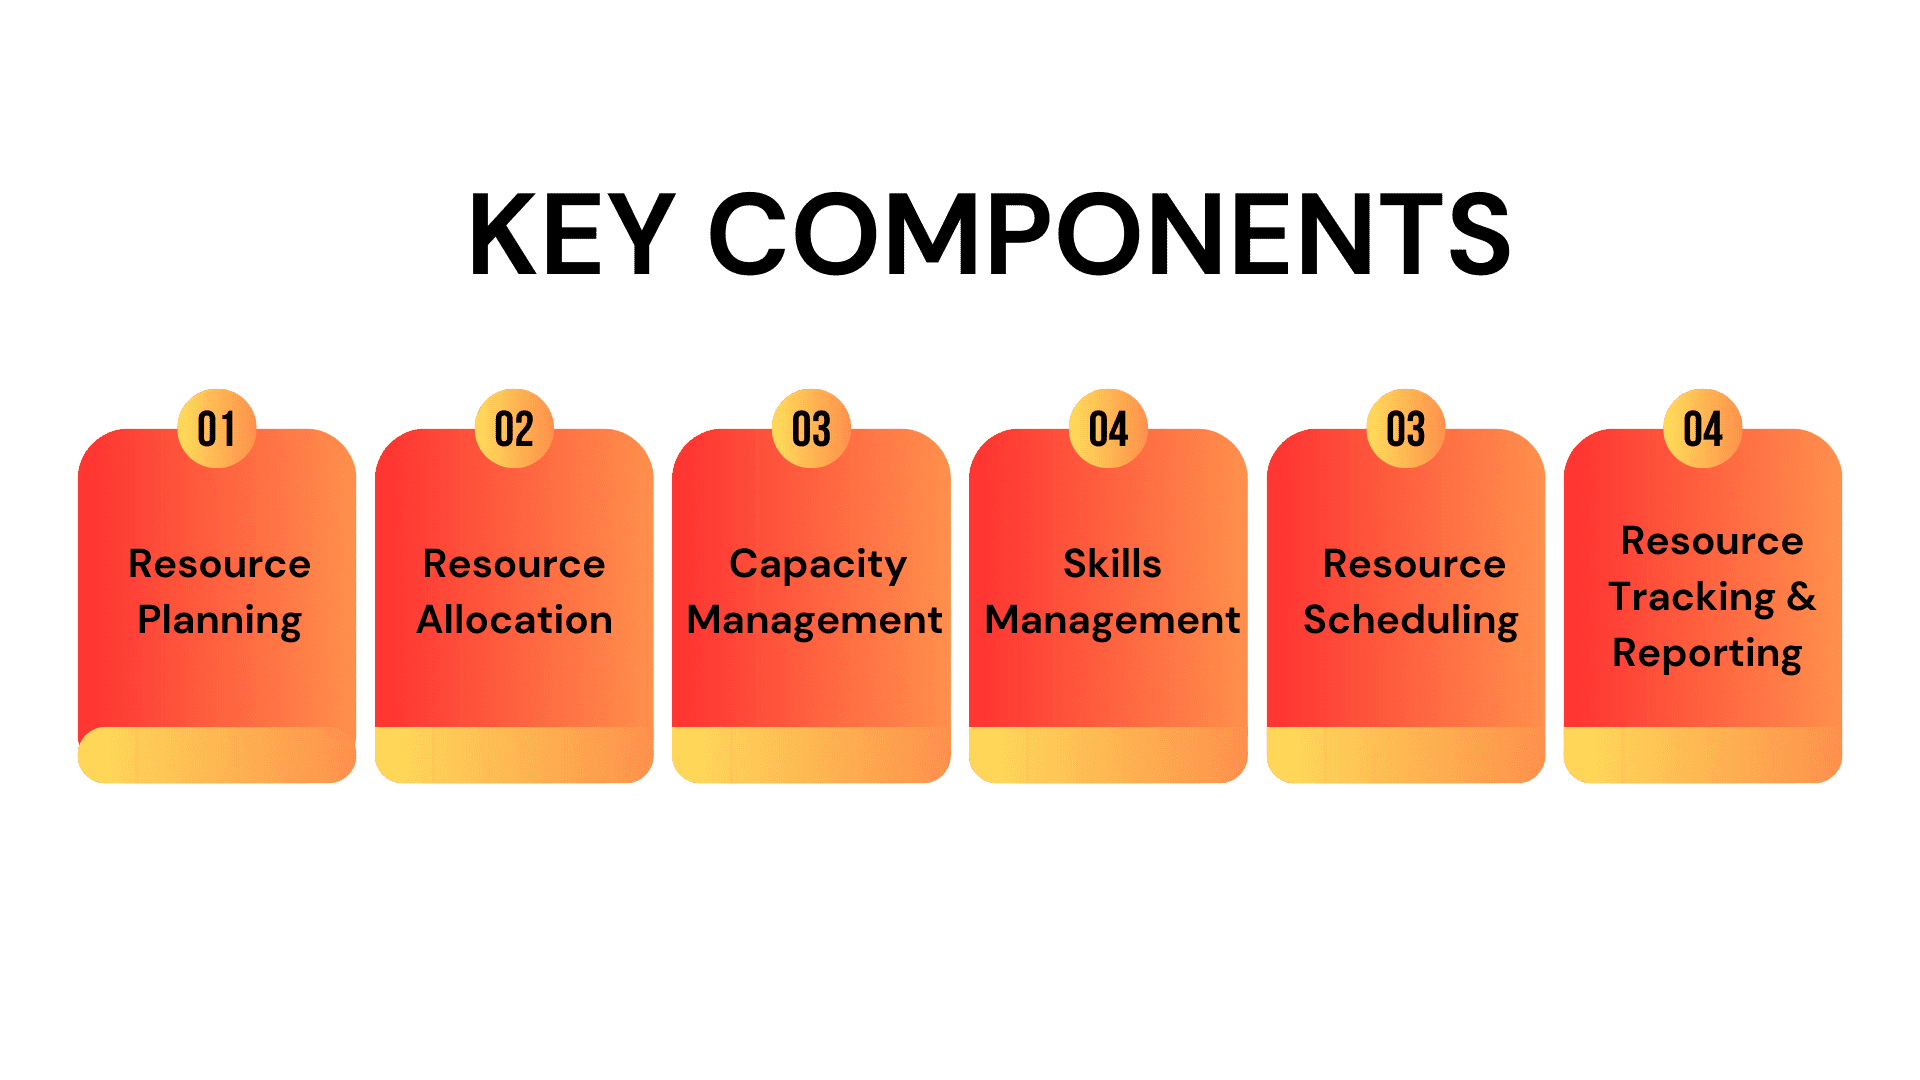 Key Components of Resource Management in PSA